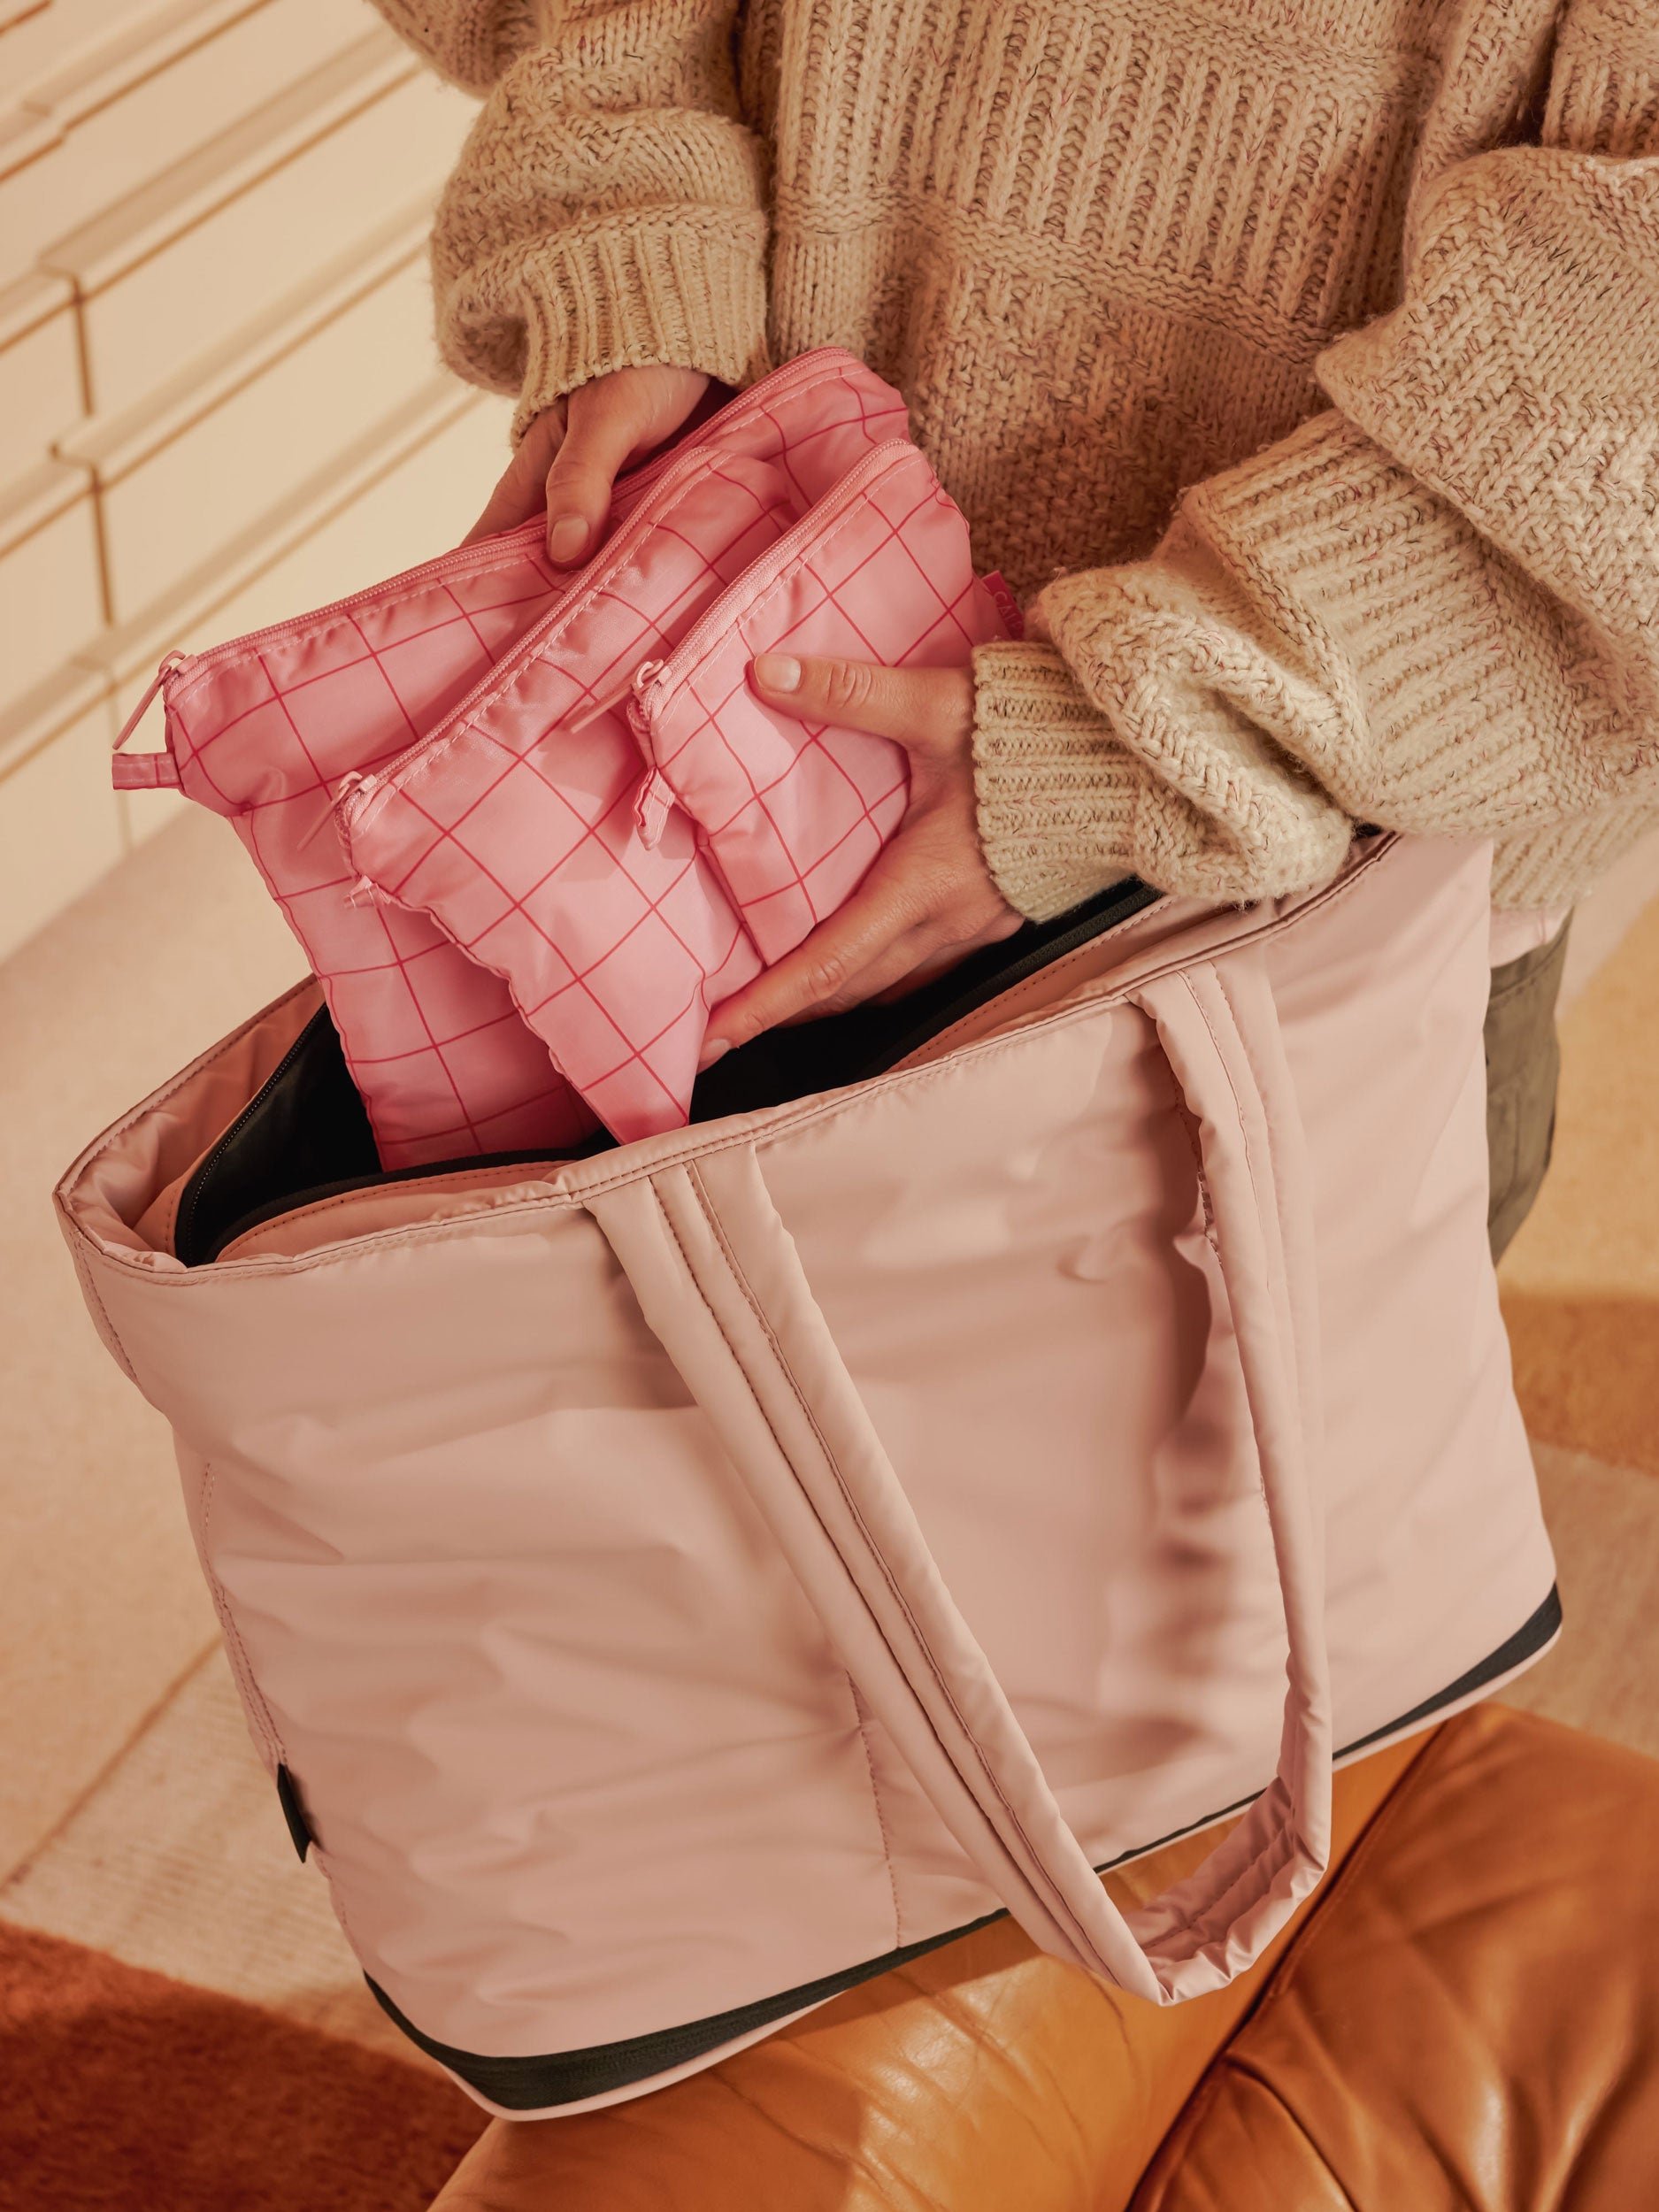 Model packing CALPAK Compakt zippered pouch set in duffel bag in pink grid